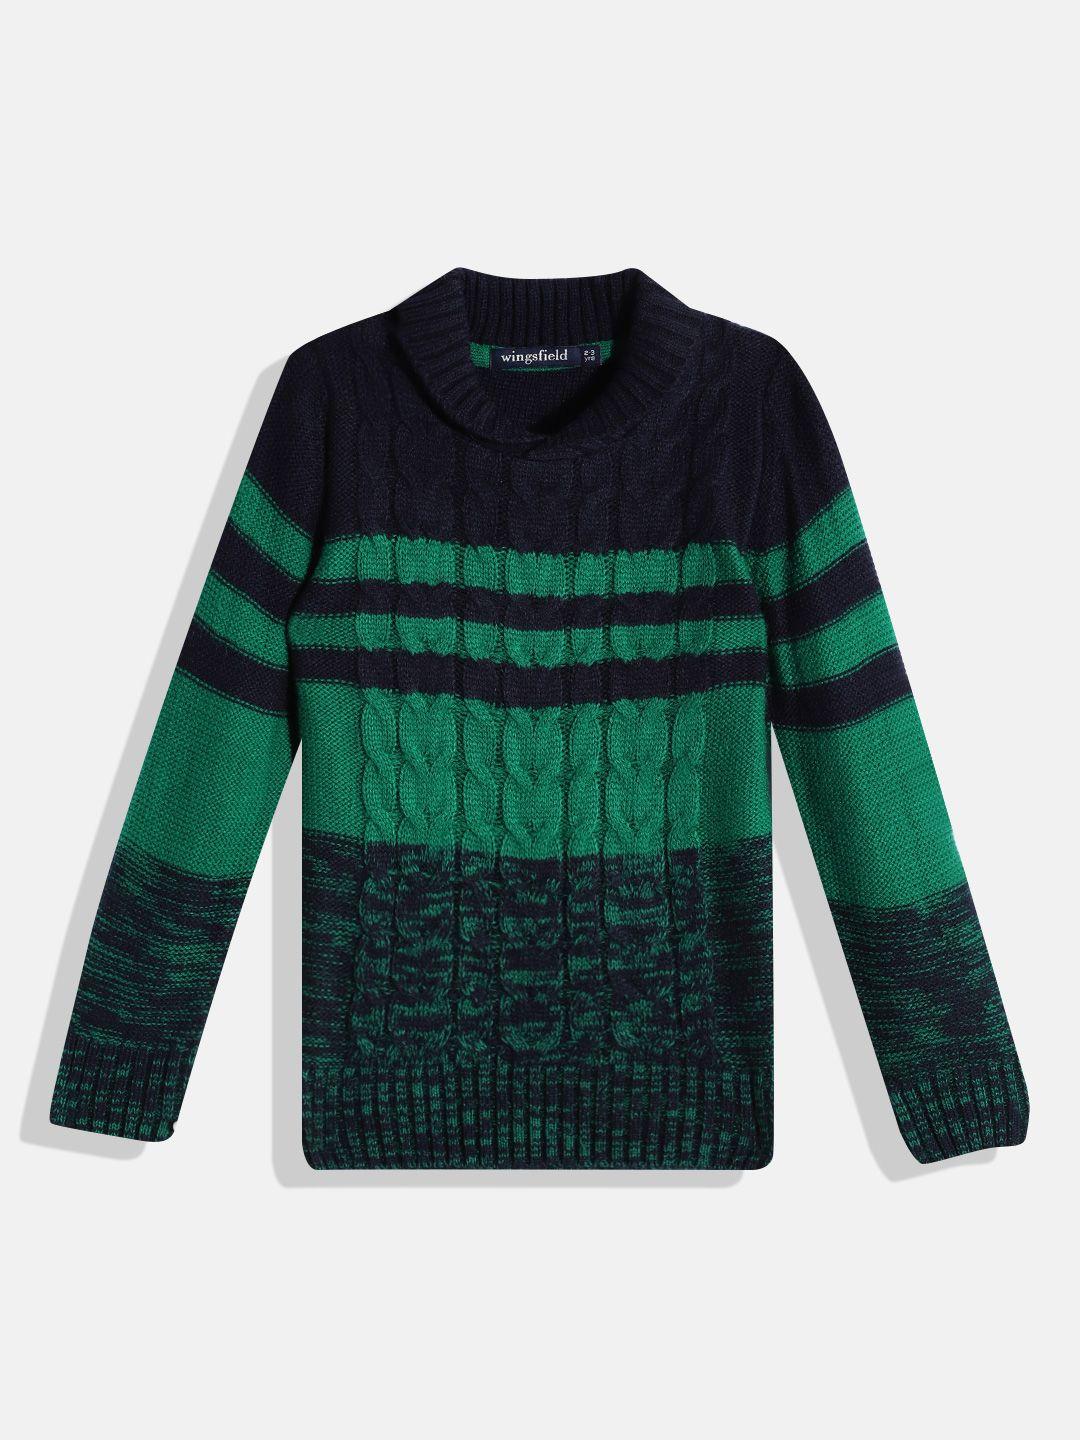 wingsfield boys green & navy blue cable knit acrylic pullover